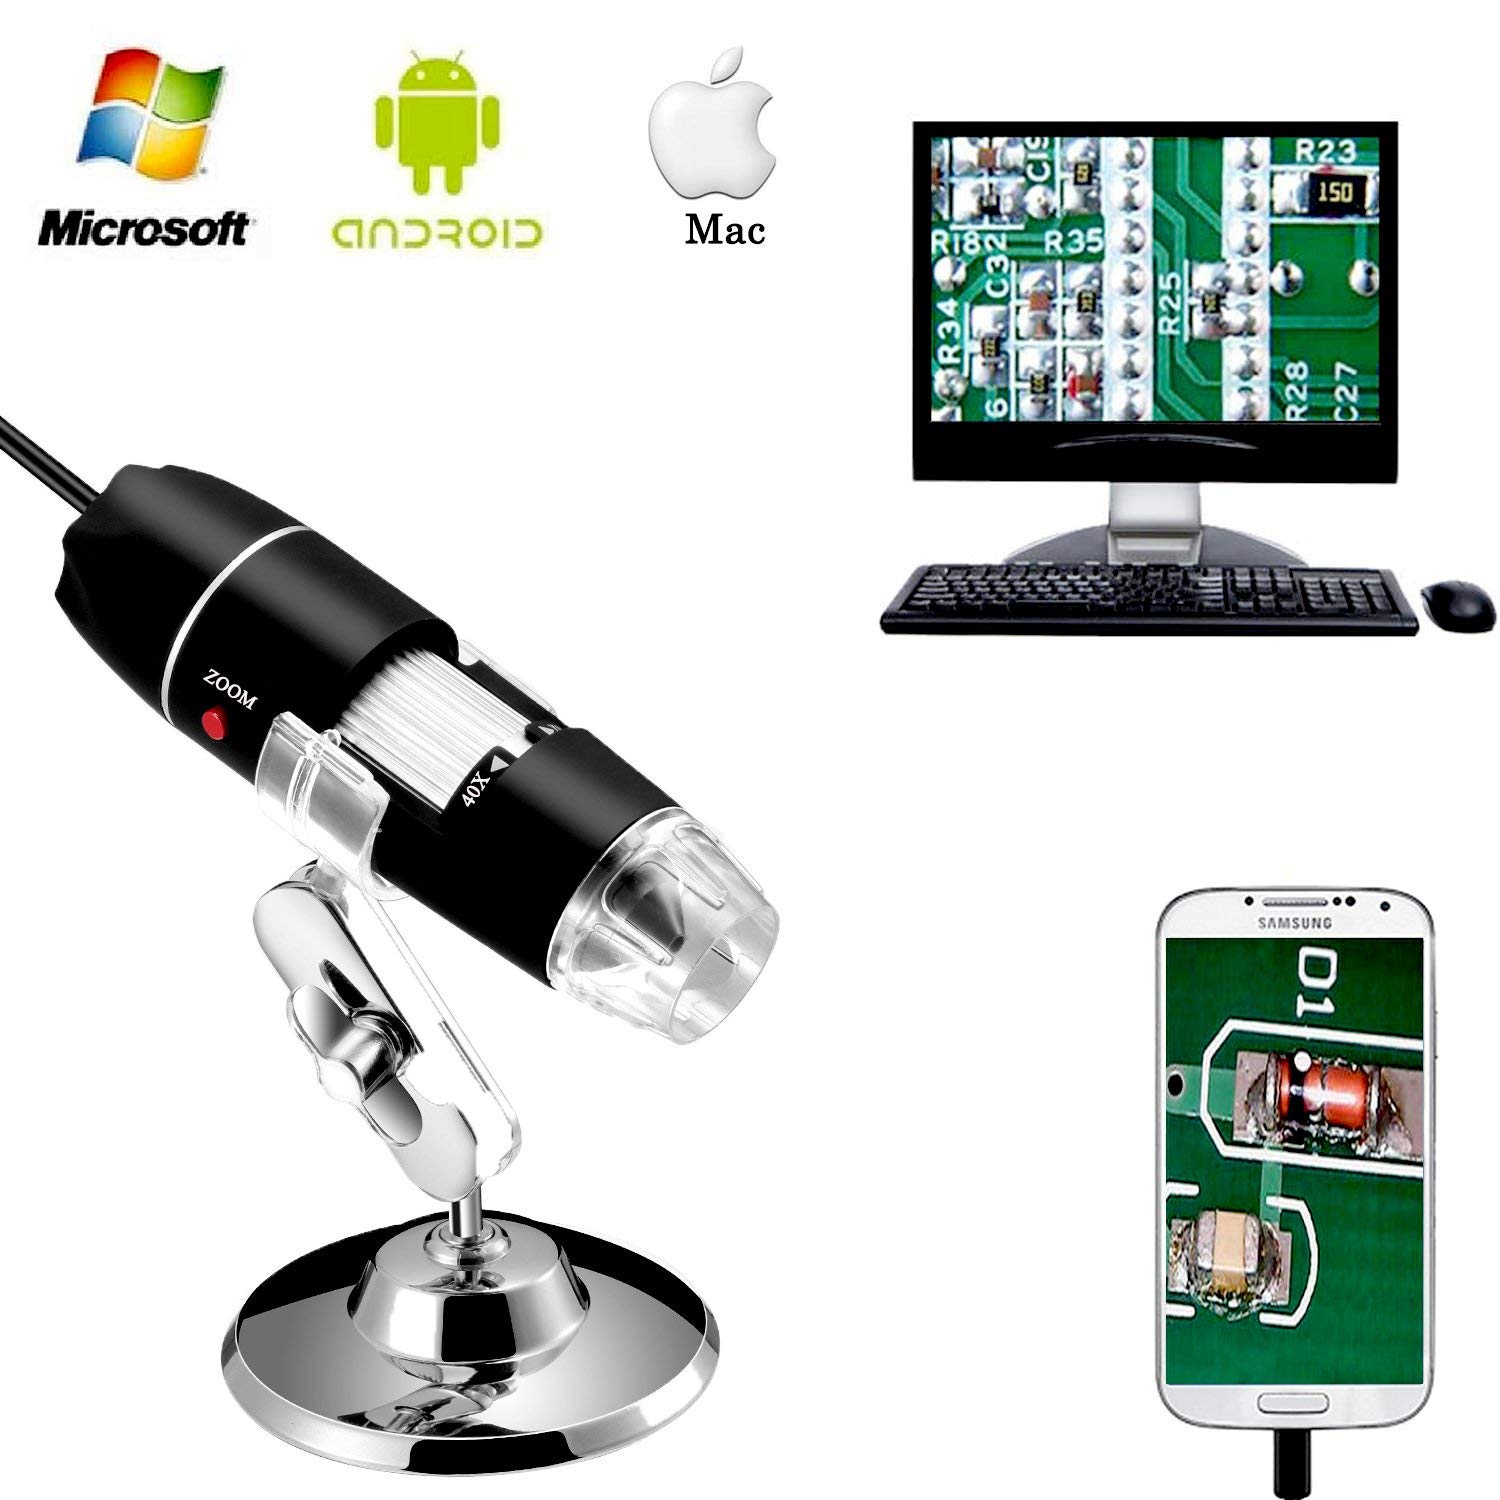 soft Youth Accurate Jiusion 40 to 1000x Magnification Endoscope 8 LED USB 2.0 Digital Microscope  Mini Camera with OTG Adapter Compatible with Mac Windows Android Linux, Microscope & Accessories